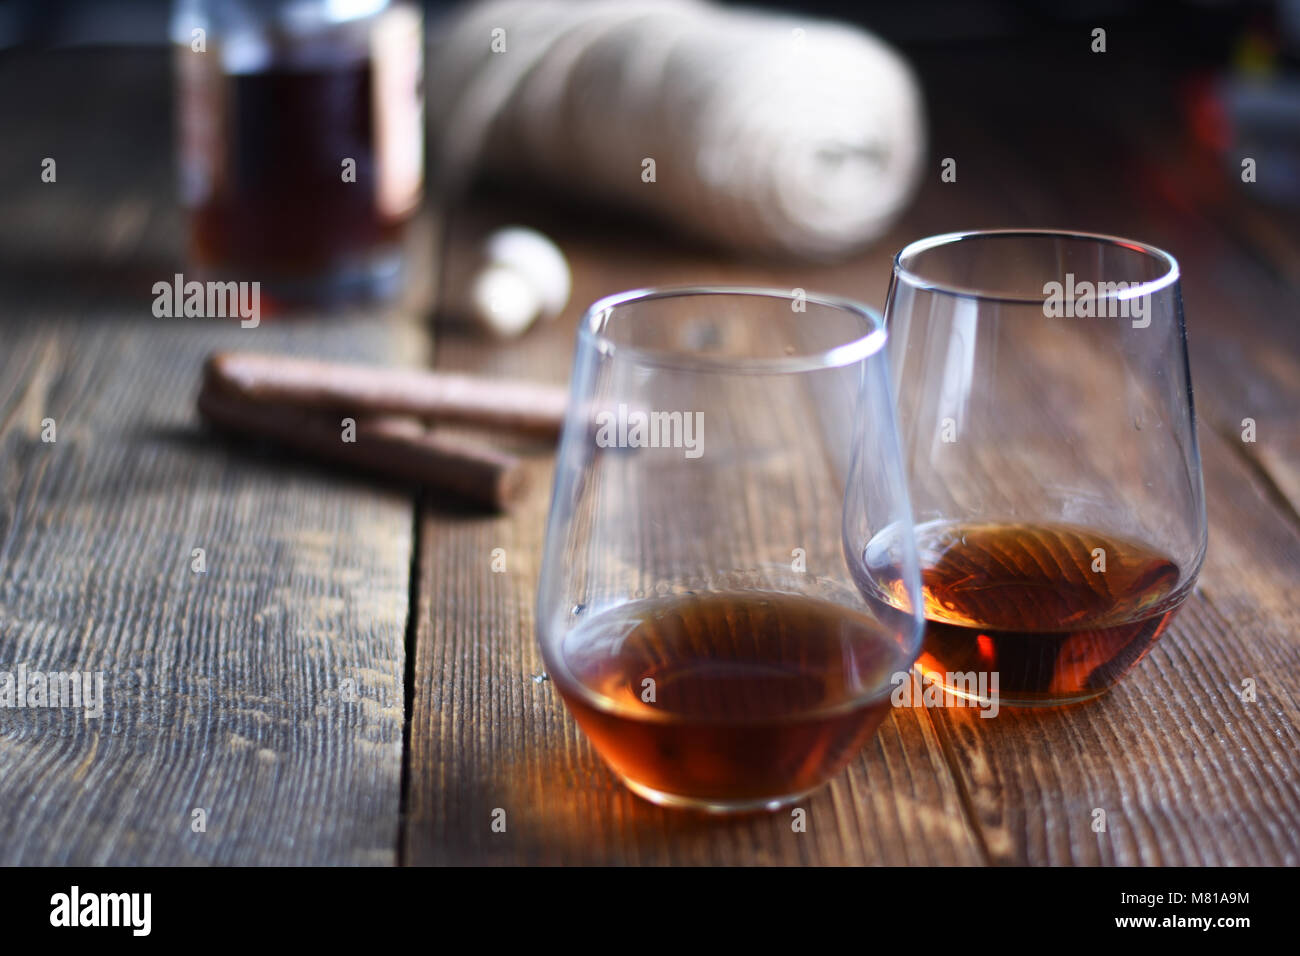 Vintage tools of Glass of rum on a rustic wooden table with cigars and bottle.barber shop on wooden background Stock Photo